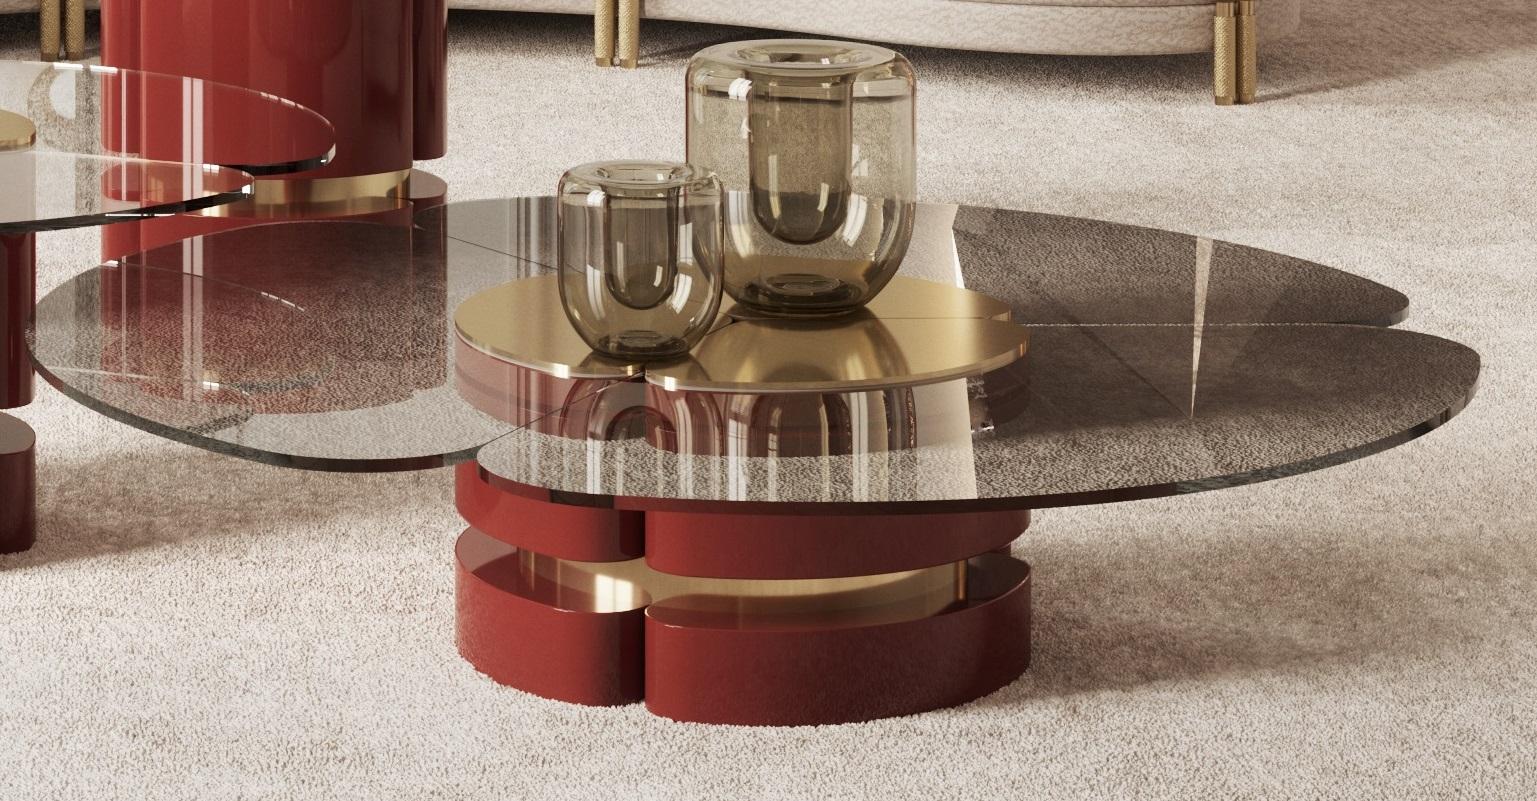 Set Of 3 Euphoria Center Table by Memoir Essence
Dimensions: Large: D 120 x W 120 x H 27 cm.
Medium: D 90 x W 90 x H 37 cm.
Small: D 50 x W 50 x H 50 cm.
Materials: Polished brass, lacquer and glass.

Available in different sizes. Please contact